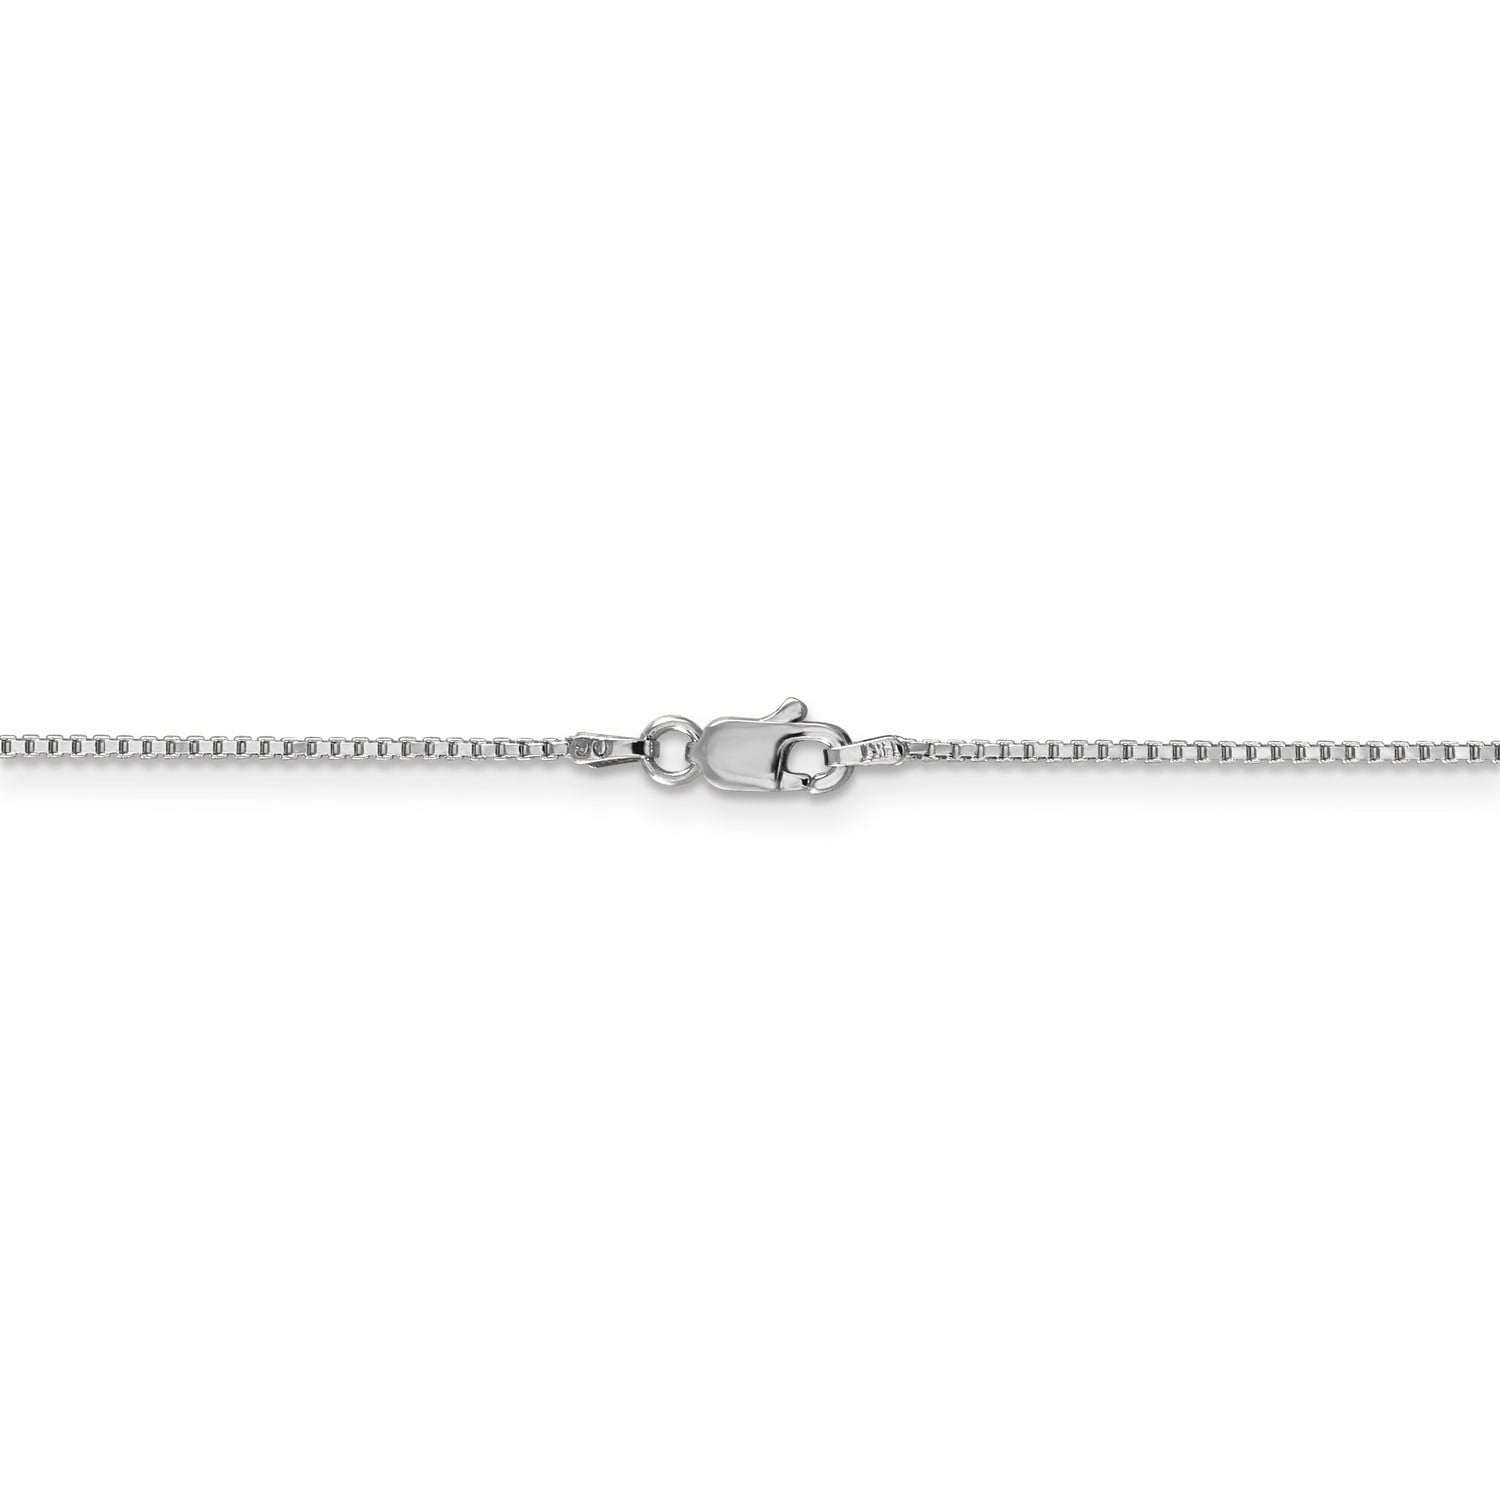 14k White Gold Classic Box Chain Necklace Bracelet or Anklet 